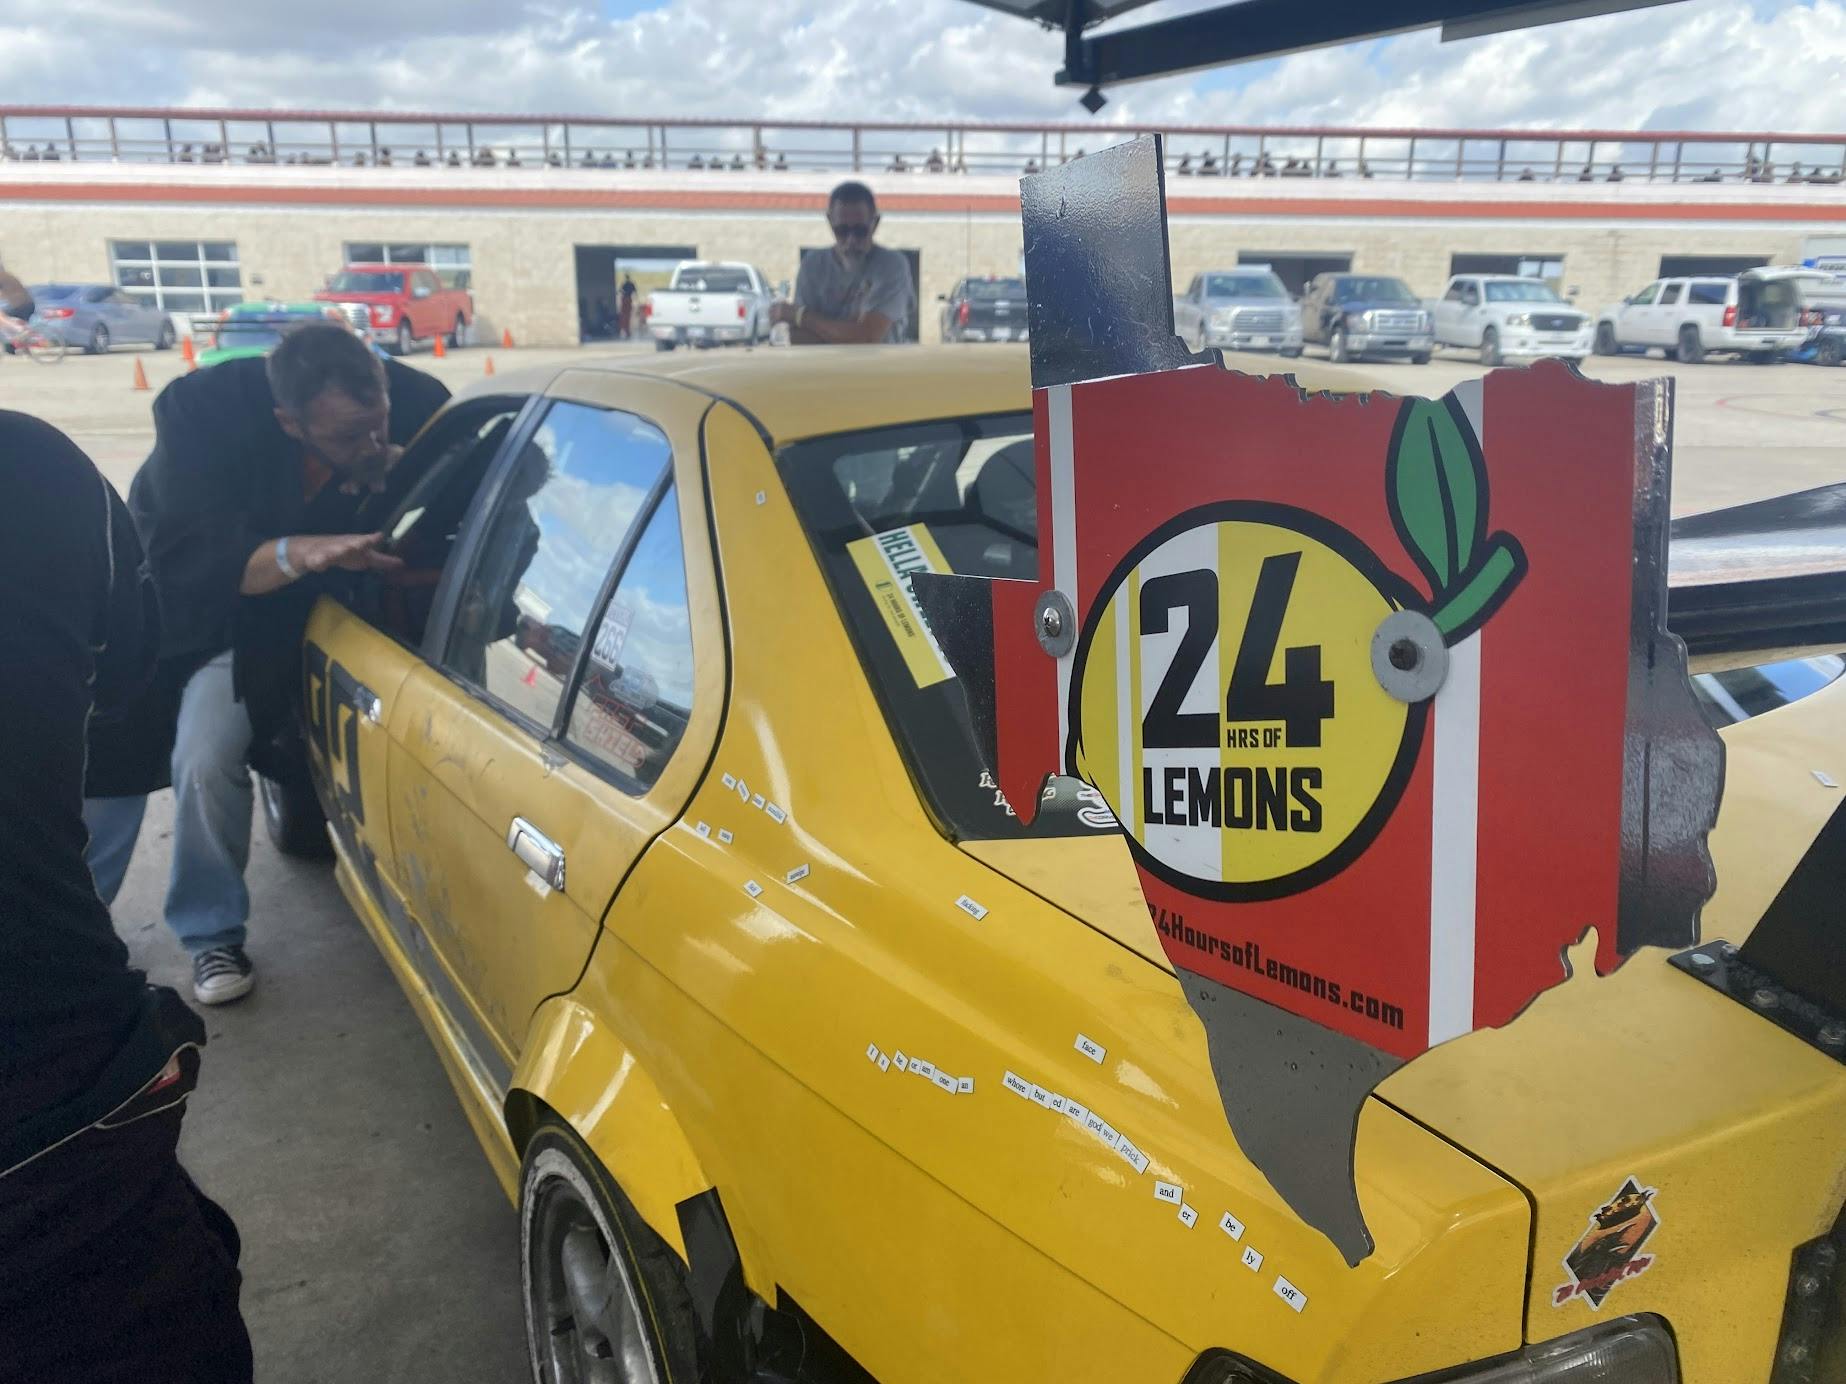 24 hours of lemons decal on BMW wing